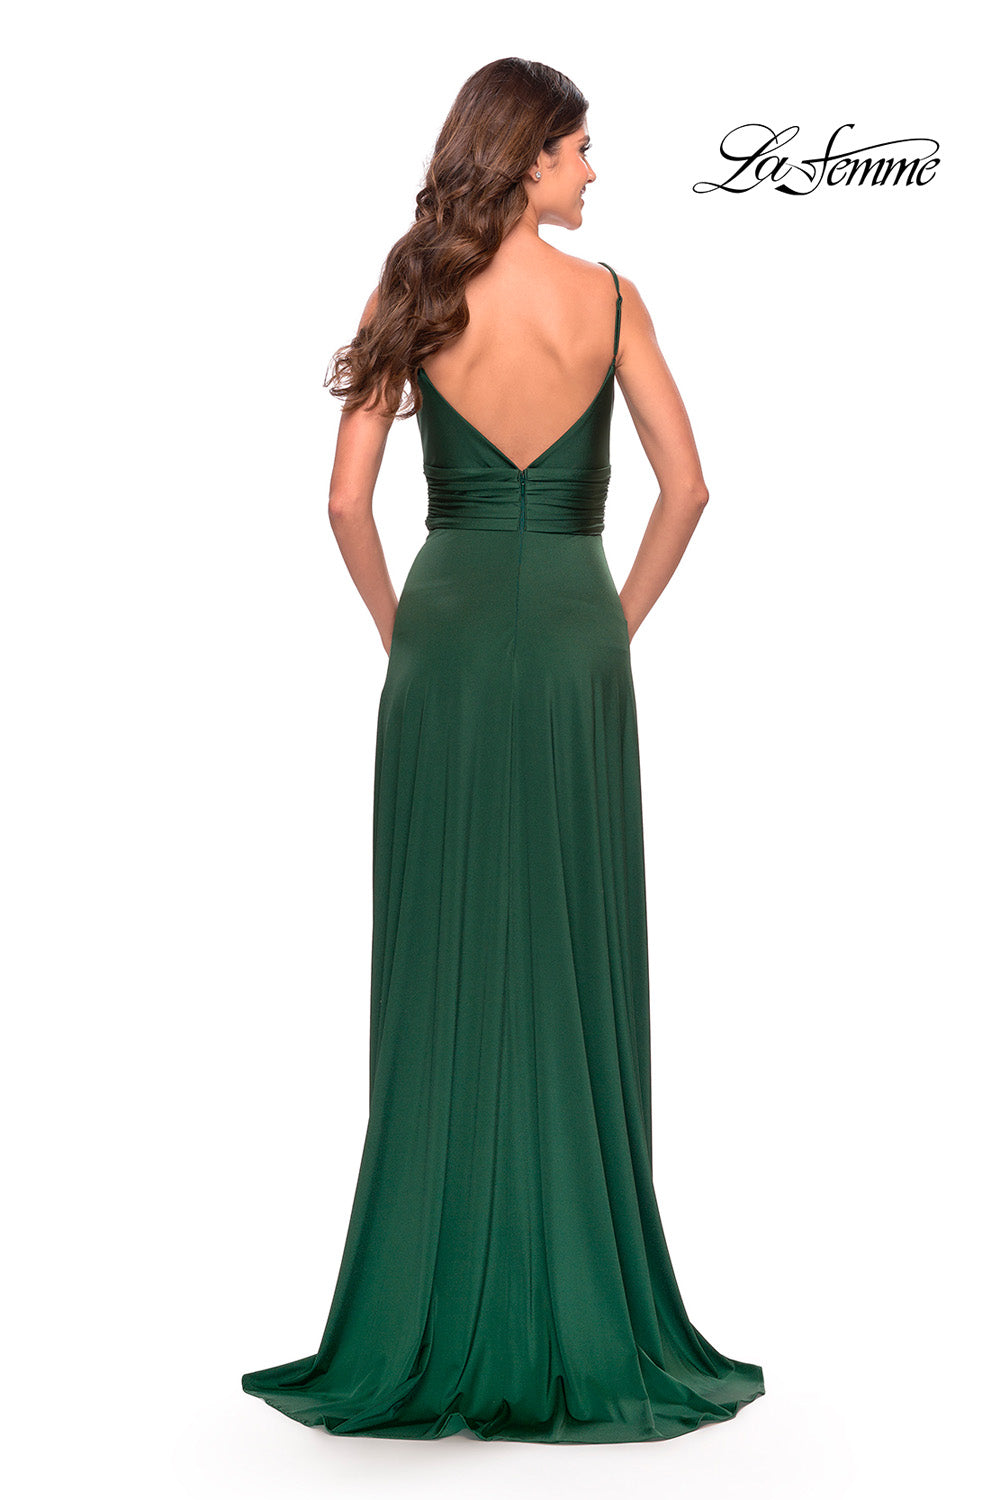 La Femme 31090 prom dress images.  La Femme 31090 is available in these colors: Black, Dark Berry, Emerald, Nude, Silver.